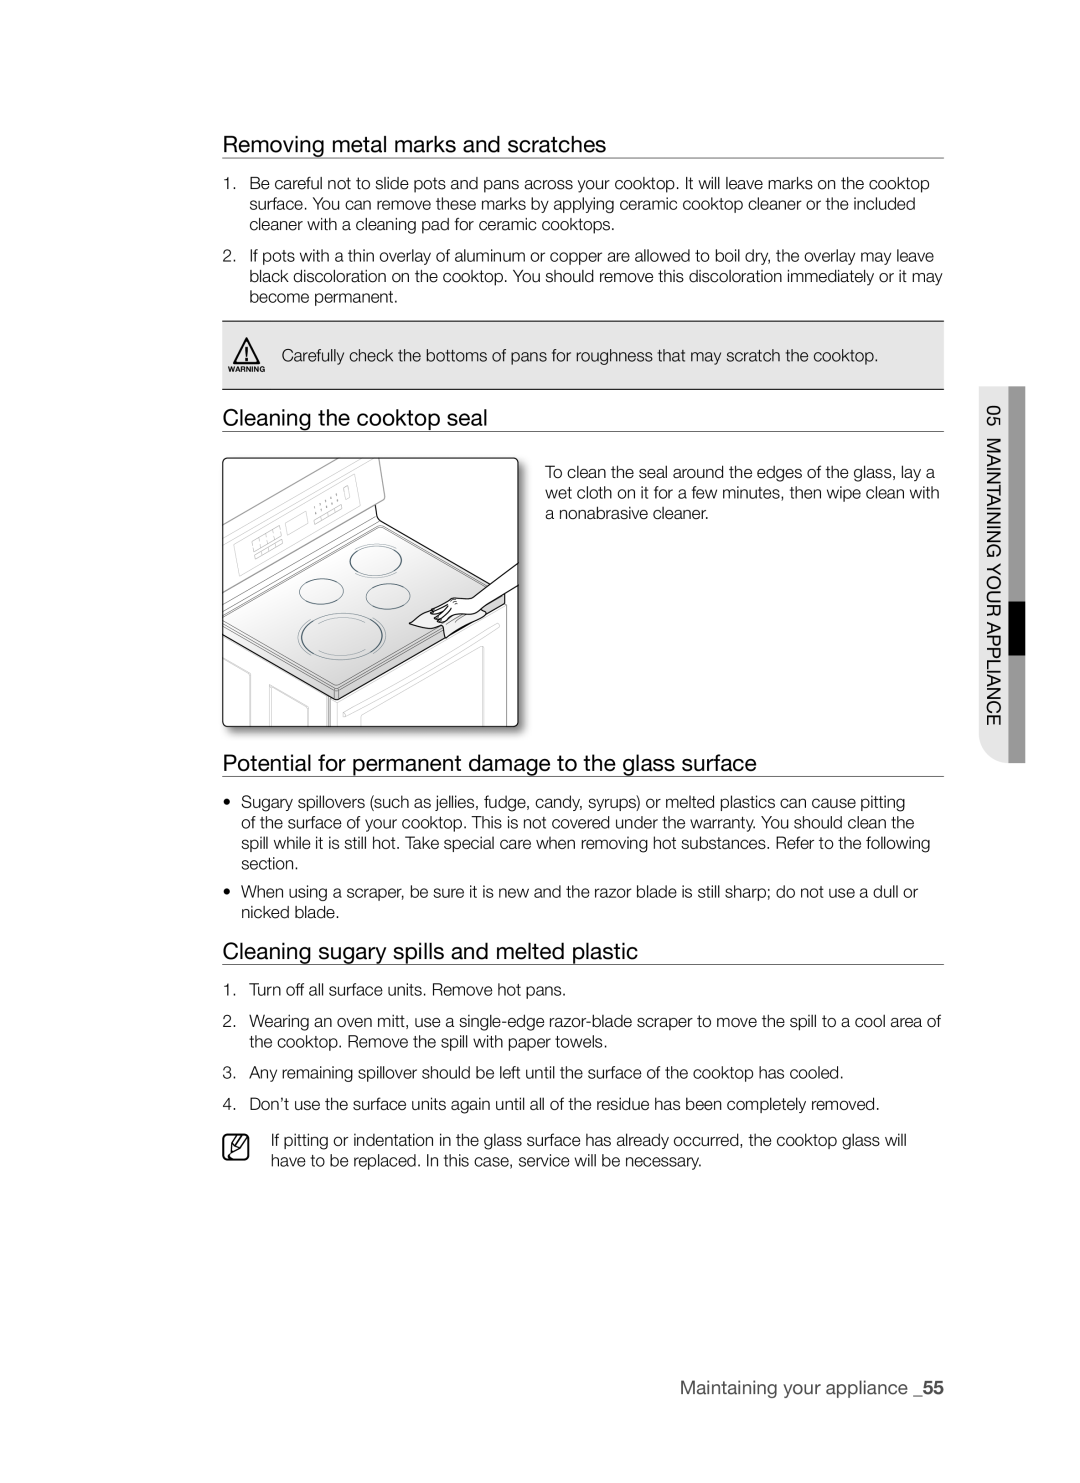 Samsung FTQ307NWGX user manual Removing metal marks and scratches, Cleaning the cooktop seal, Maintaining Your Appliance 